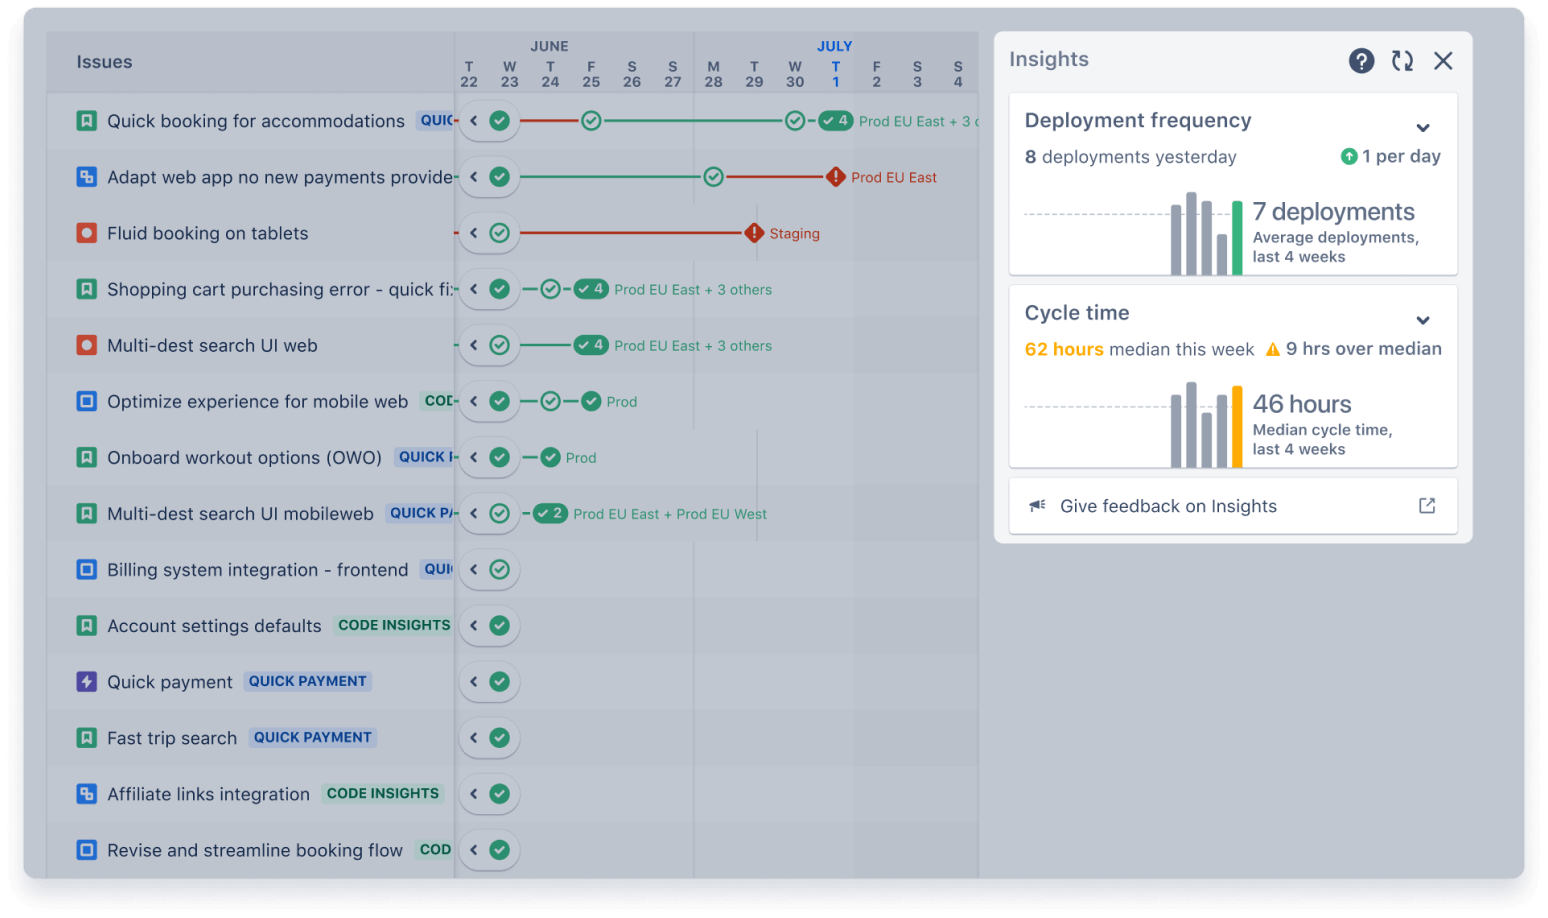 Insights-Funktion in Jira Software